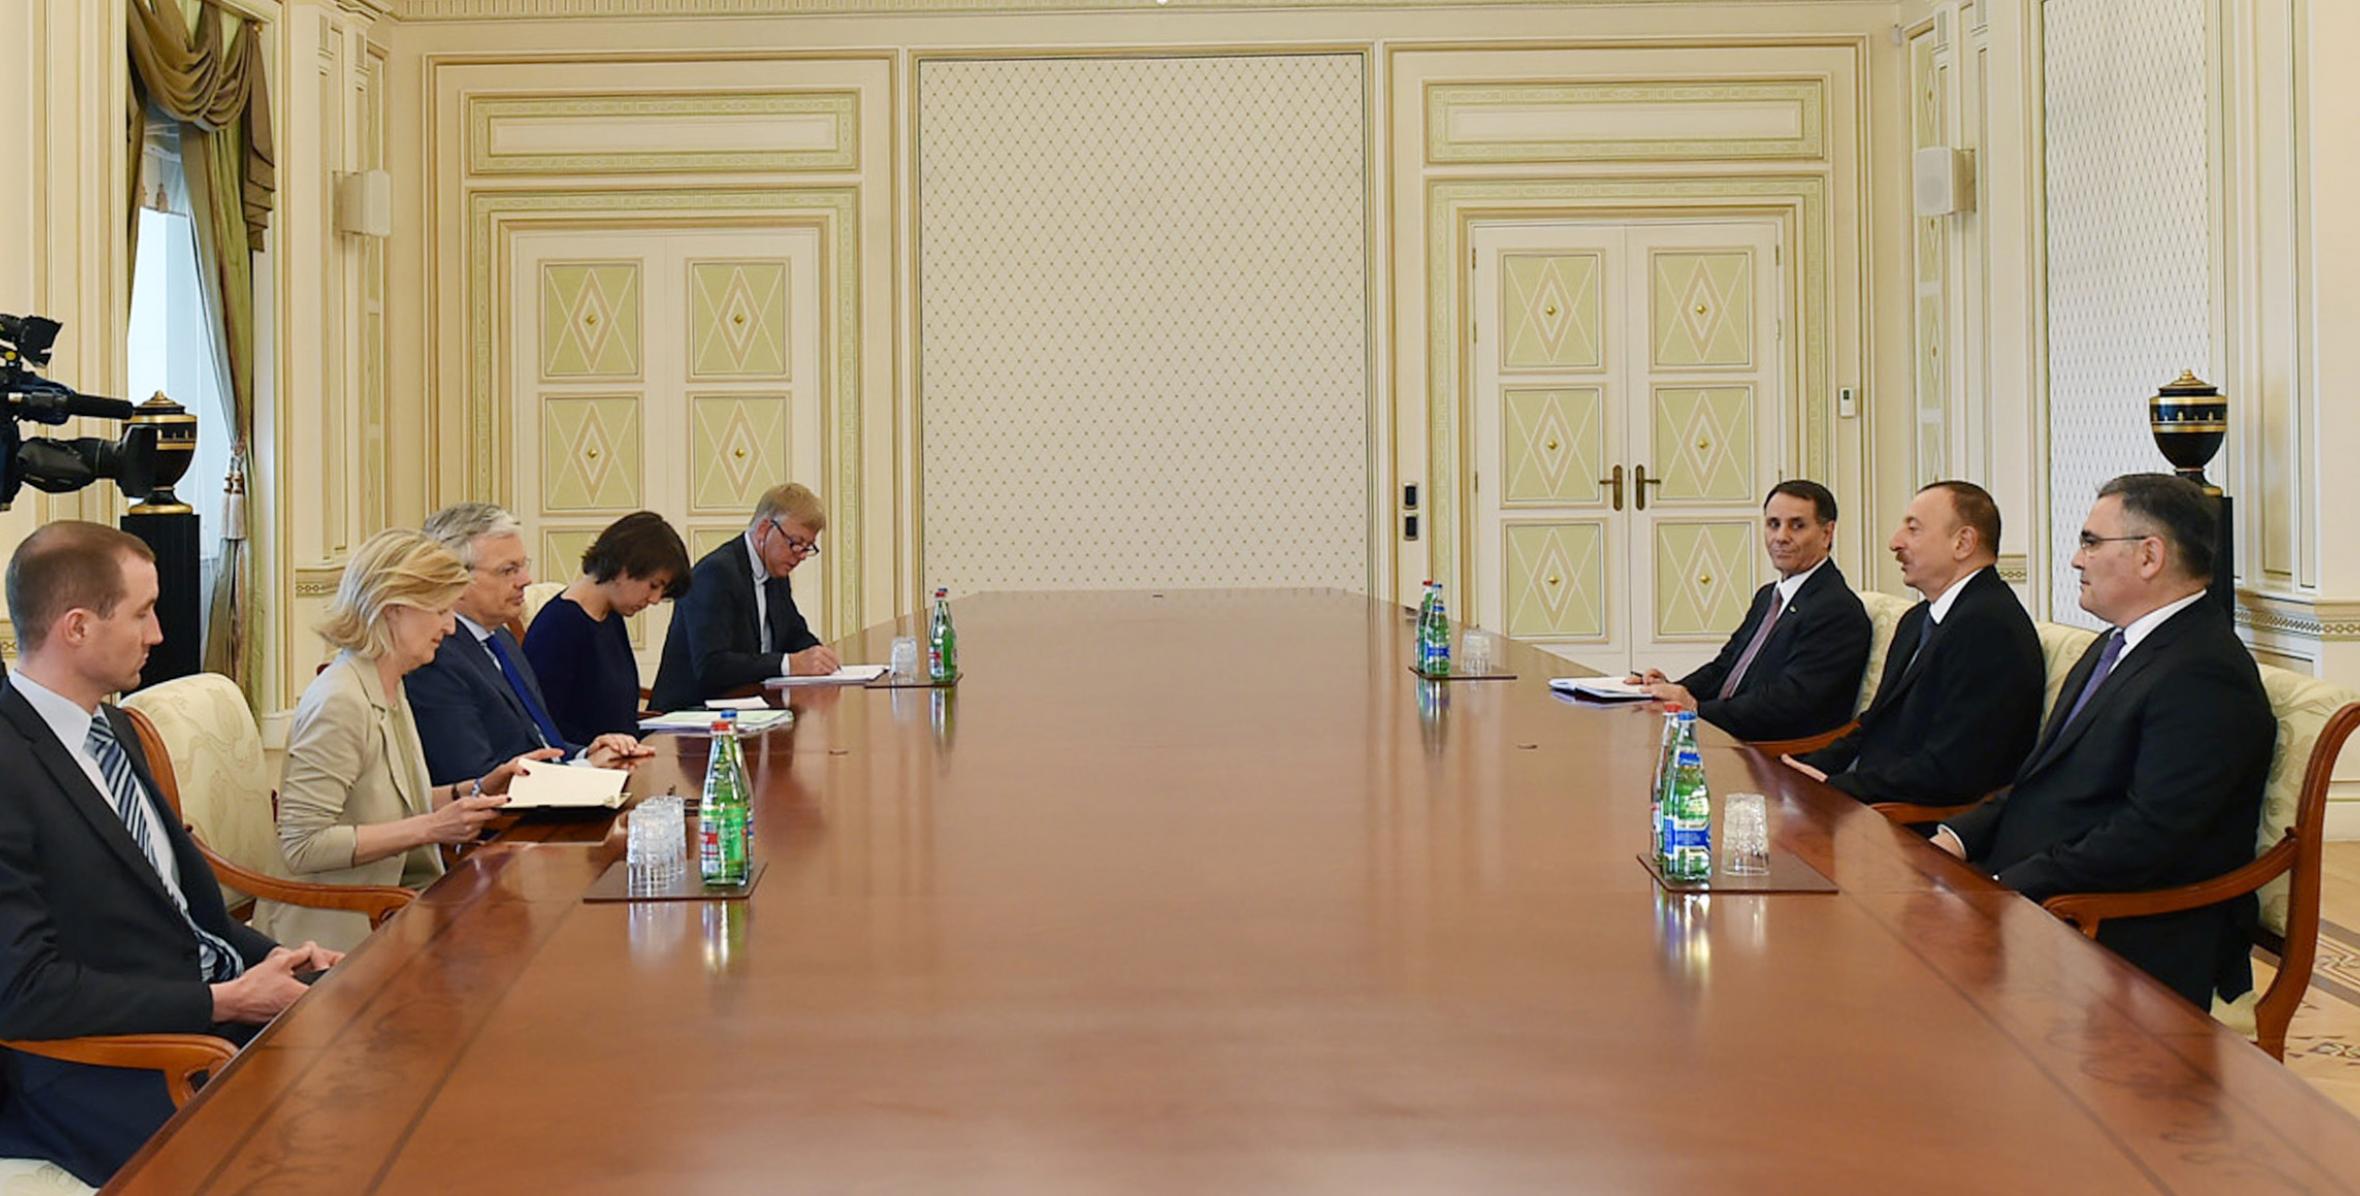 Ilham Aliyev received a delegation led by the Deputy Prime Minister of Belgium